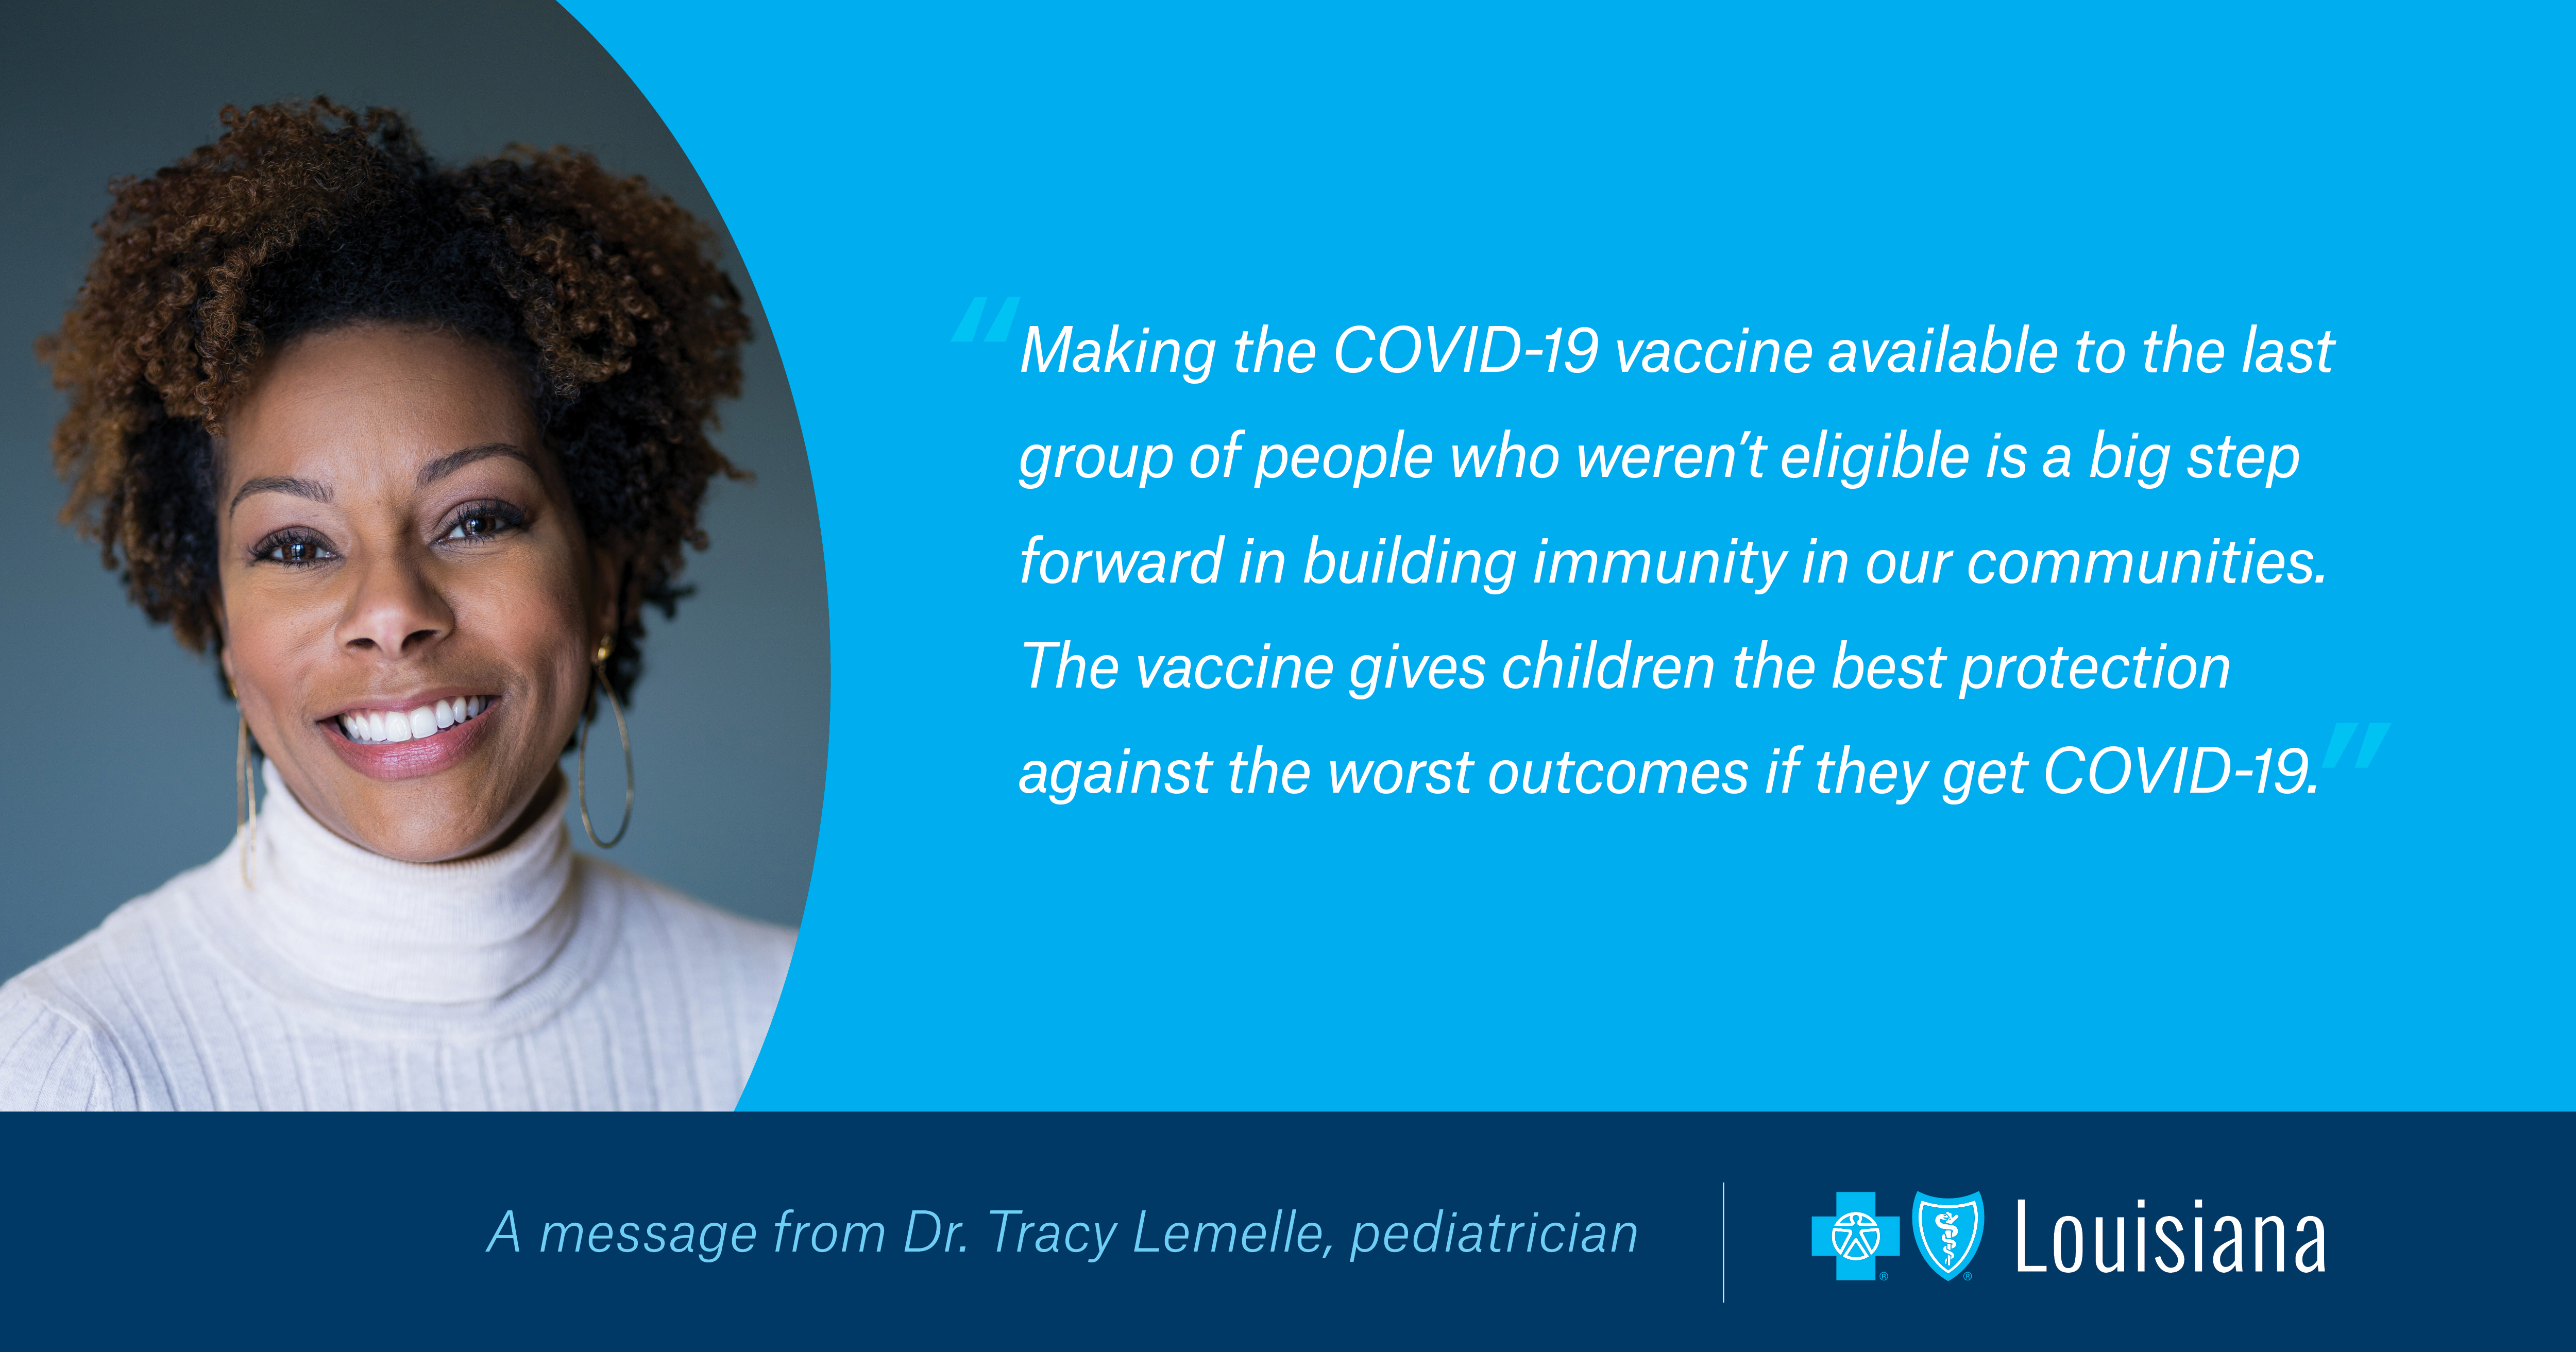 Louisiana Expands LA Wallet to Give Parents Access to Child's COVID-19 vax  info